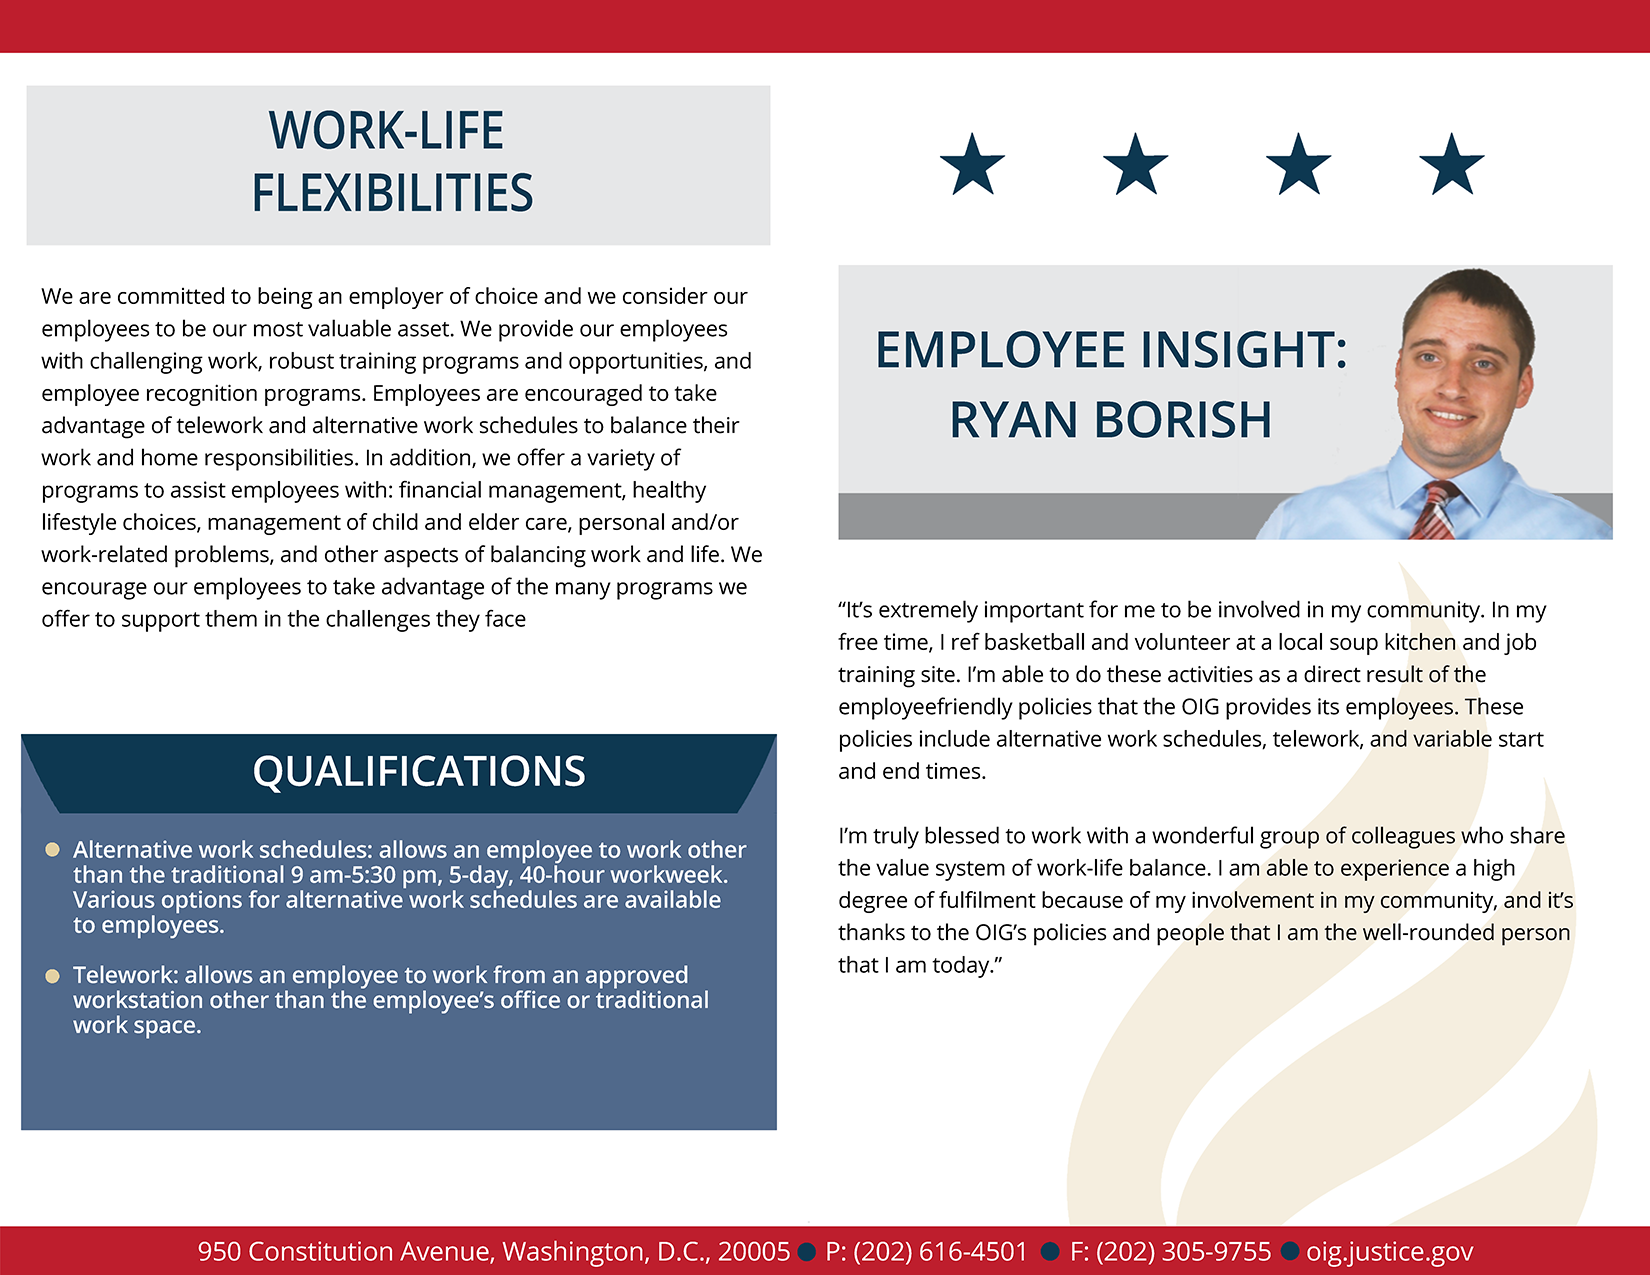 Learn more about work life flexibilities